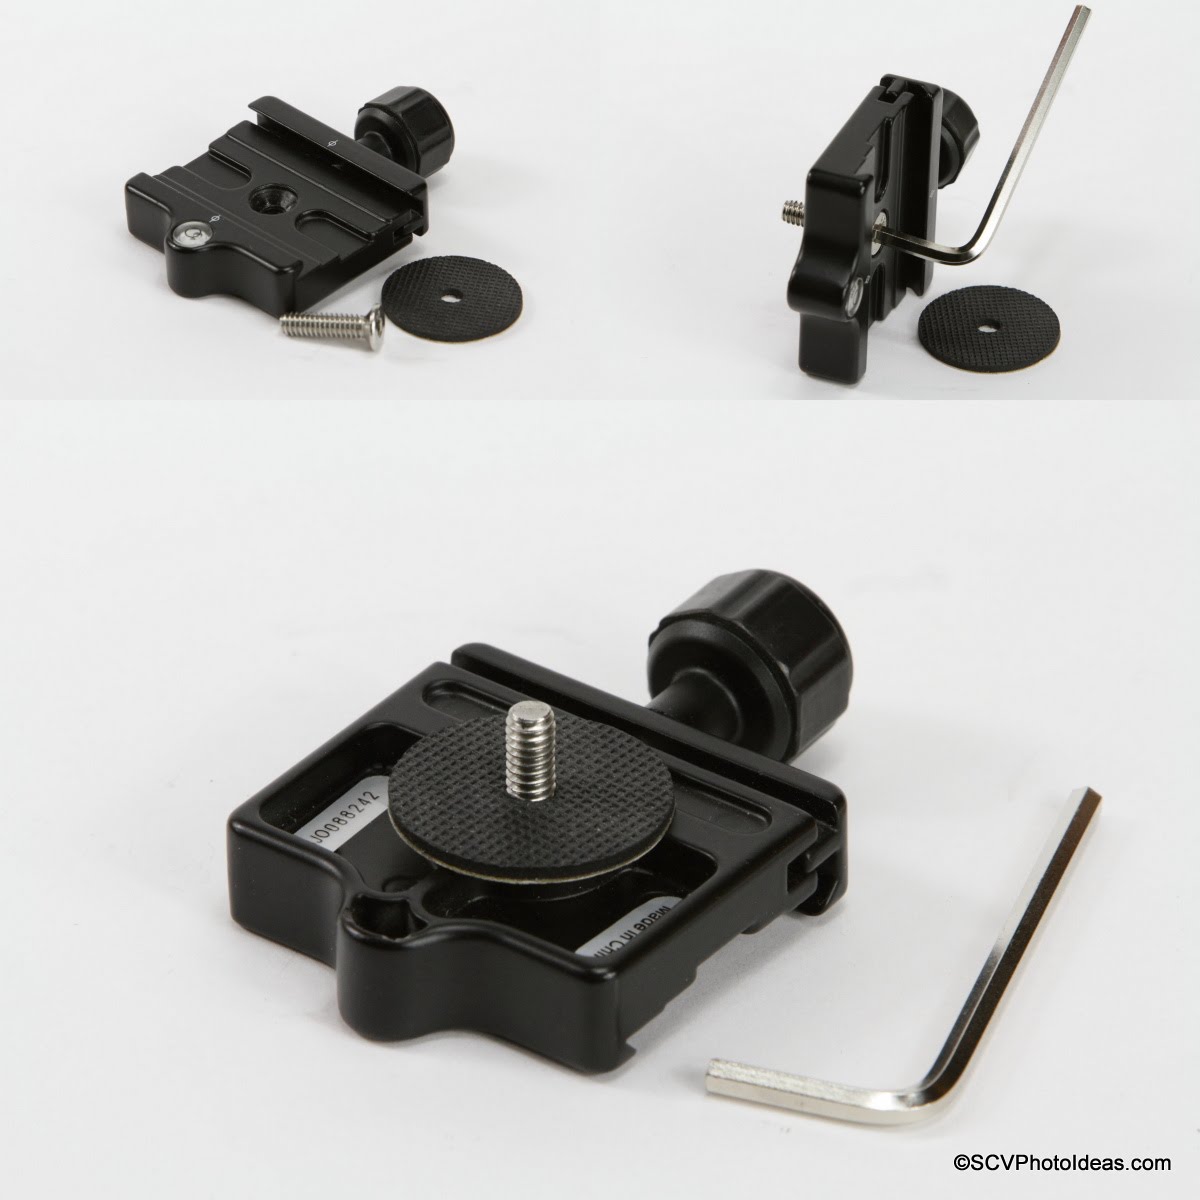 Preparation sequence of Benro B2 clamp w/ 1/4" screw and rubber washer